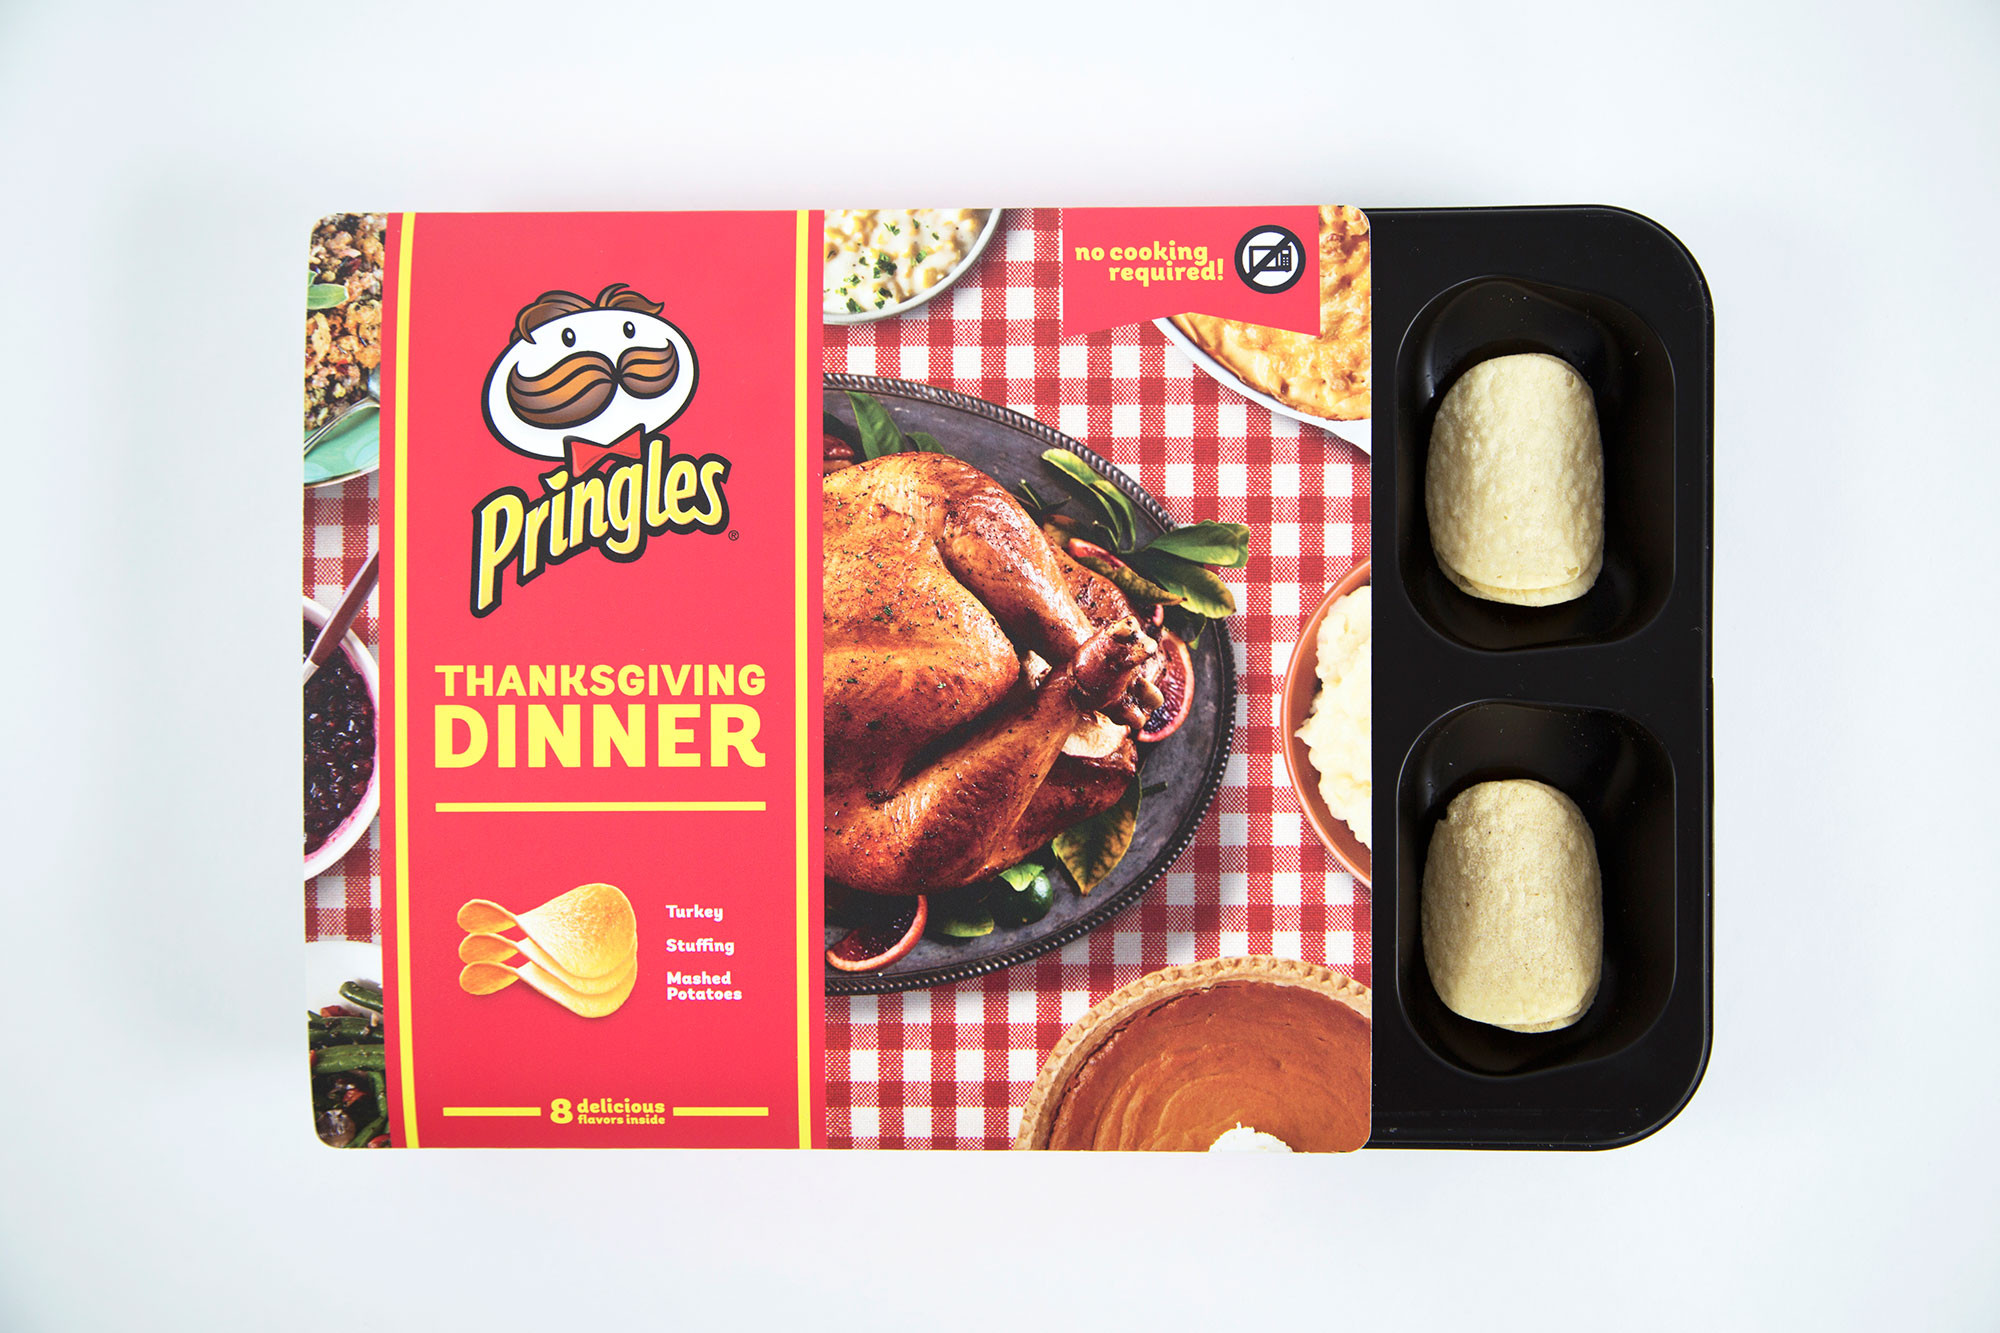 Thanksgiving Dinner Pringles
 Pringles Unveils Thanksgiving Flavors for the First Time